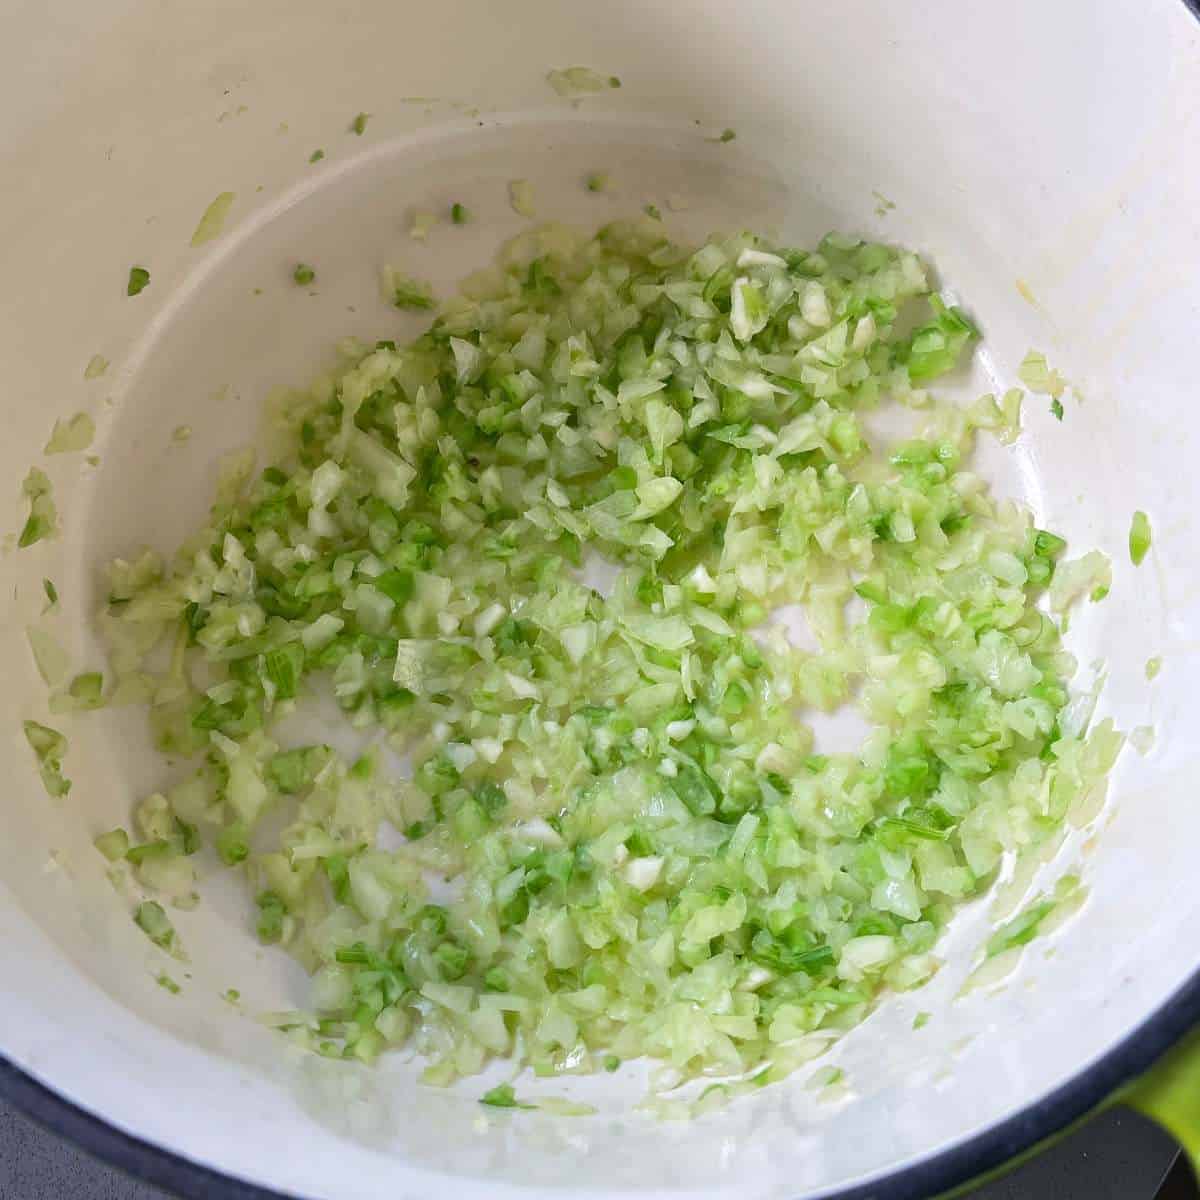 Diced onion and celery frying in a large round ceramic pot